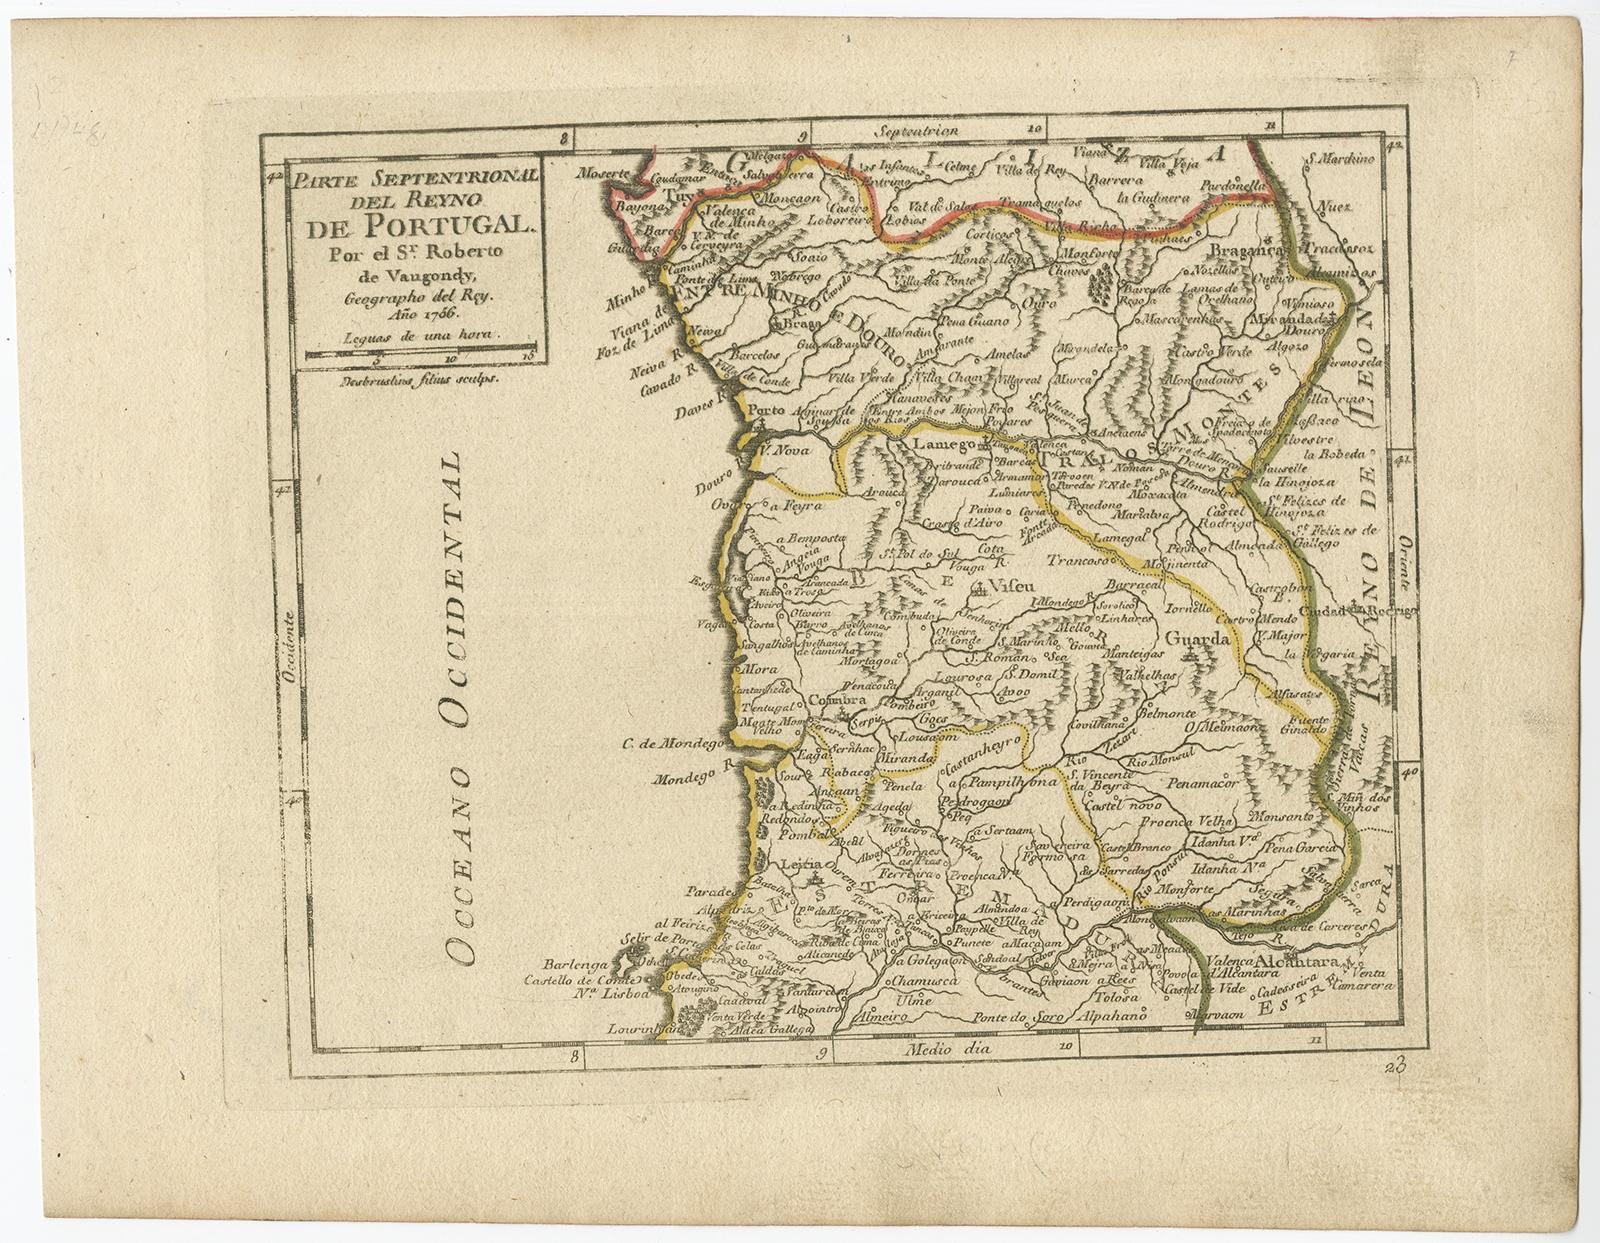 Antique map Portugal titled 'Parte Sepentrional del Reyno de Portugal'. 

Antique map of Northern Portugal. This map originates from 'Atlas Portatif'. 

Artists and Engravers: Didier Robert de Vaugondy (ca. 1723-1786) was the son of prominent